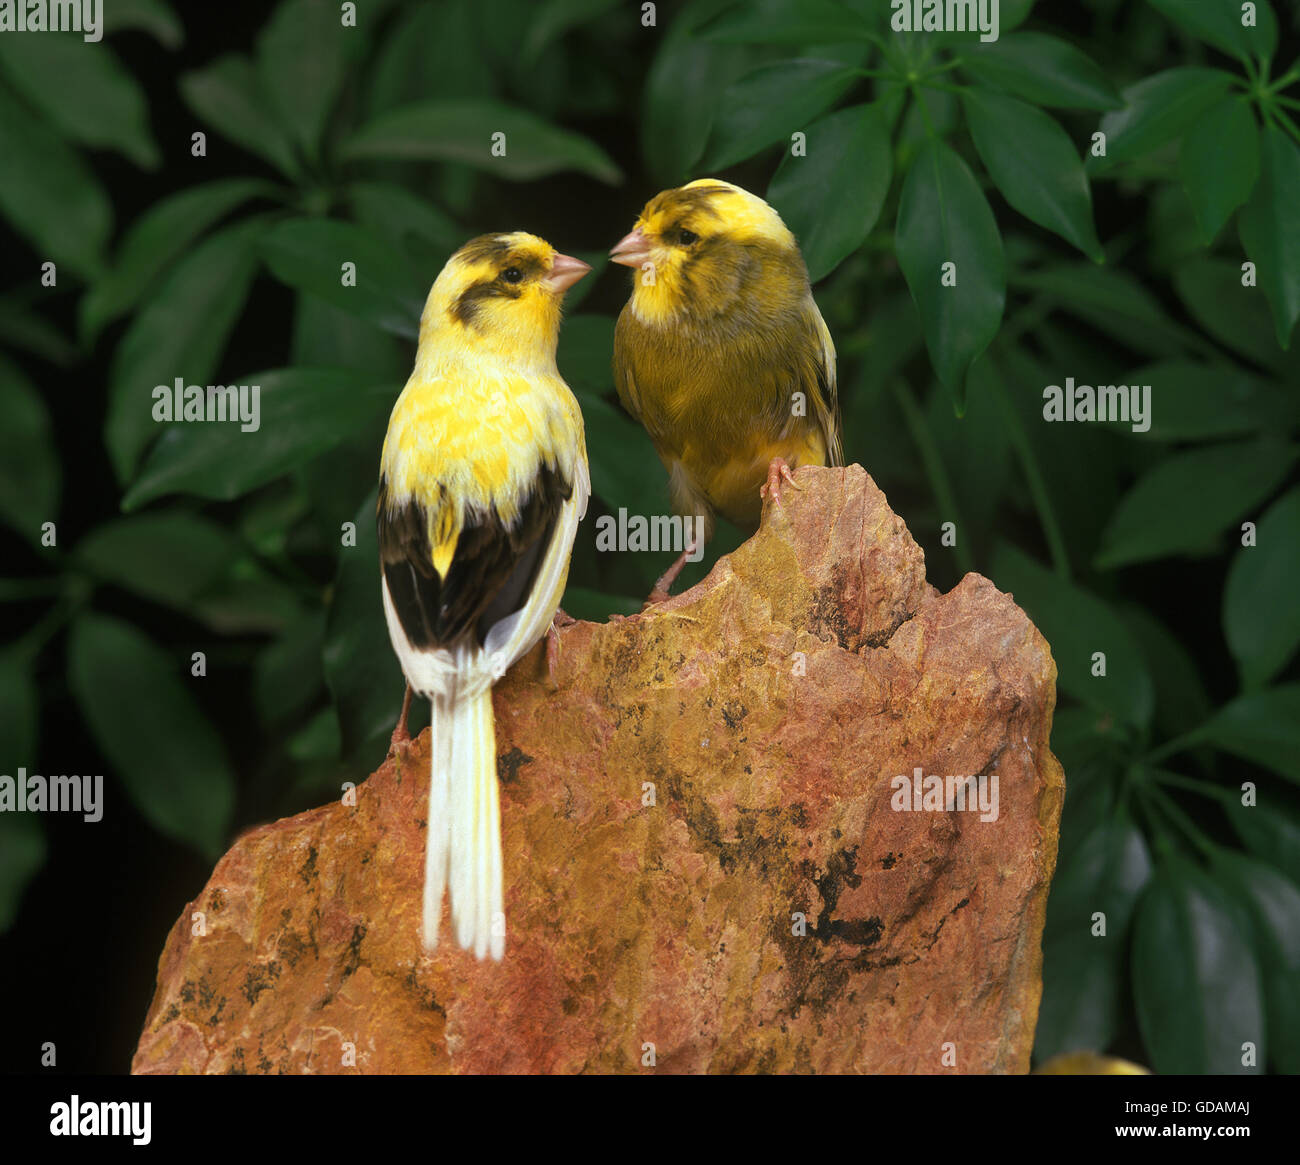 Yorkshire Canaries, on Stone Stock Photo